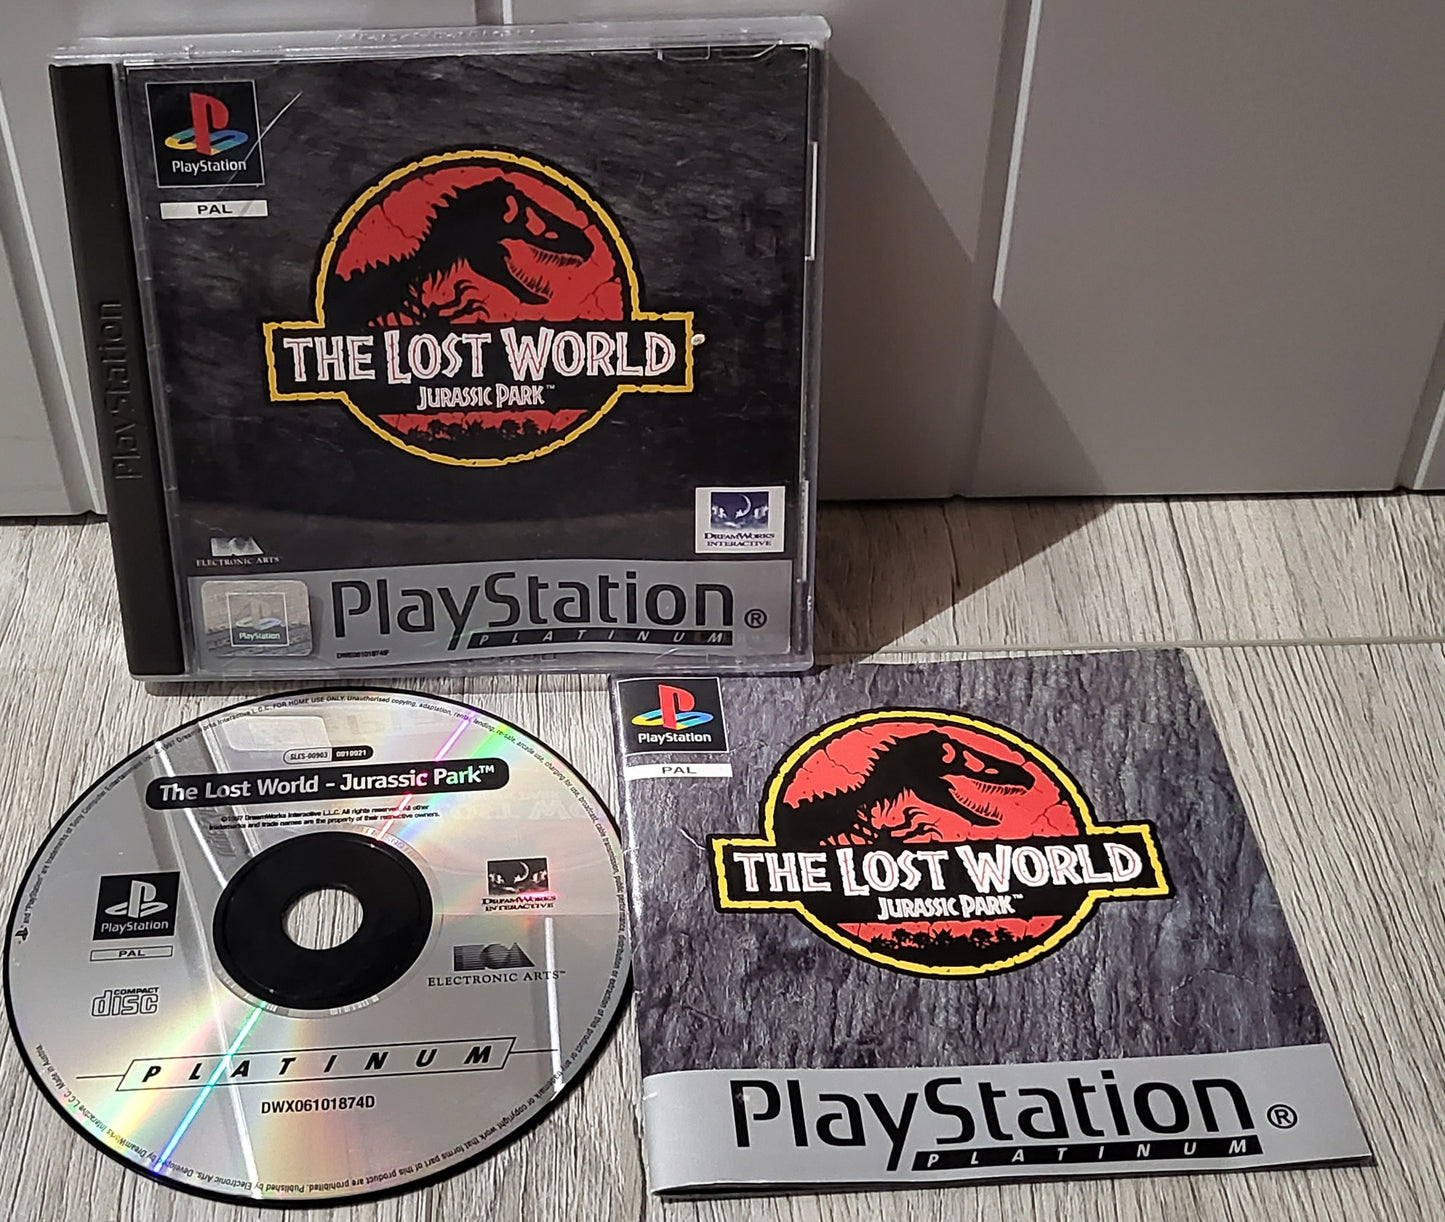 The Lost World Jurassic Park Platinum Sony Playstation 1 (PS1) Game